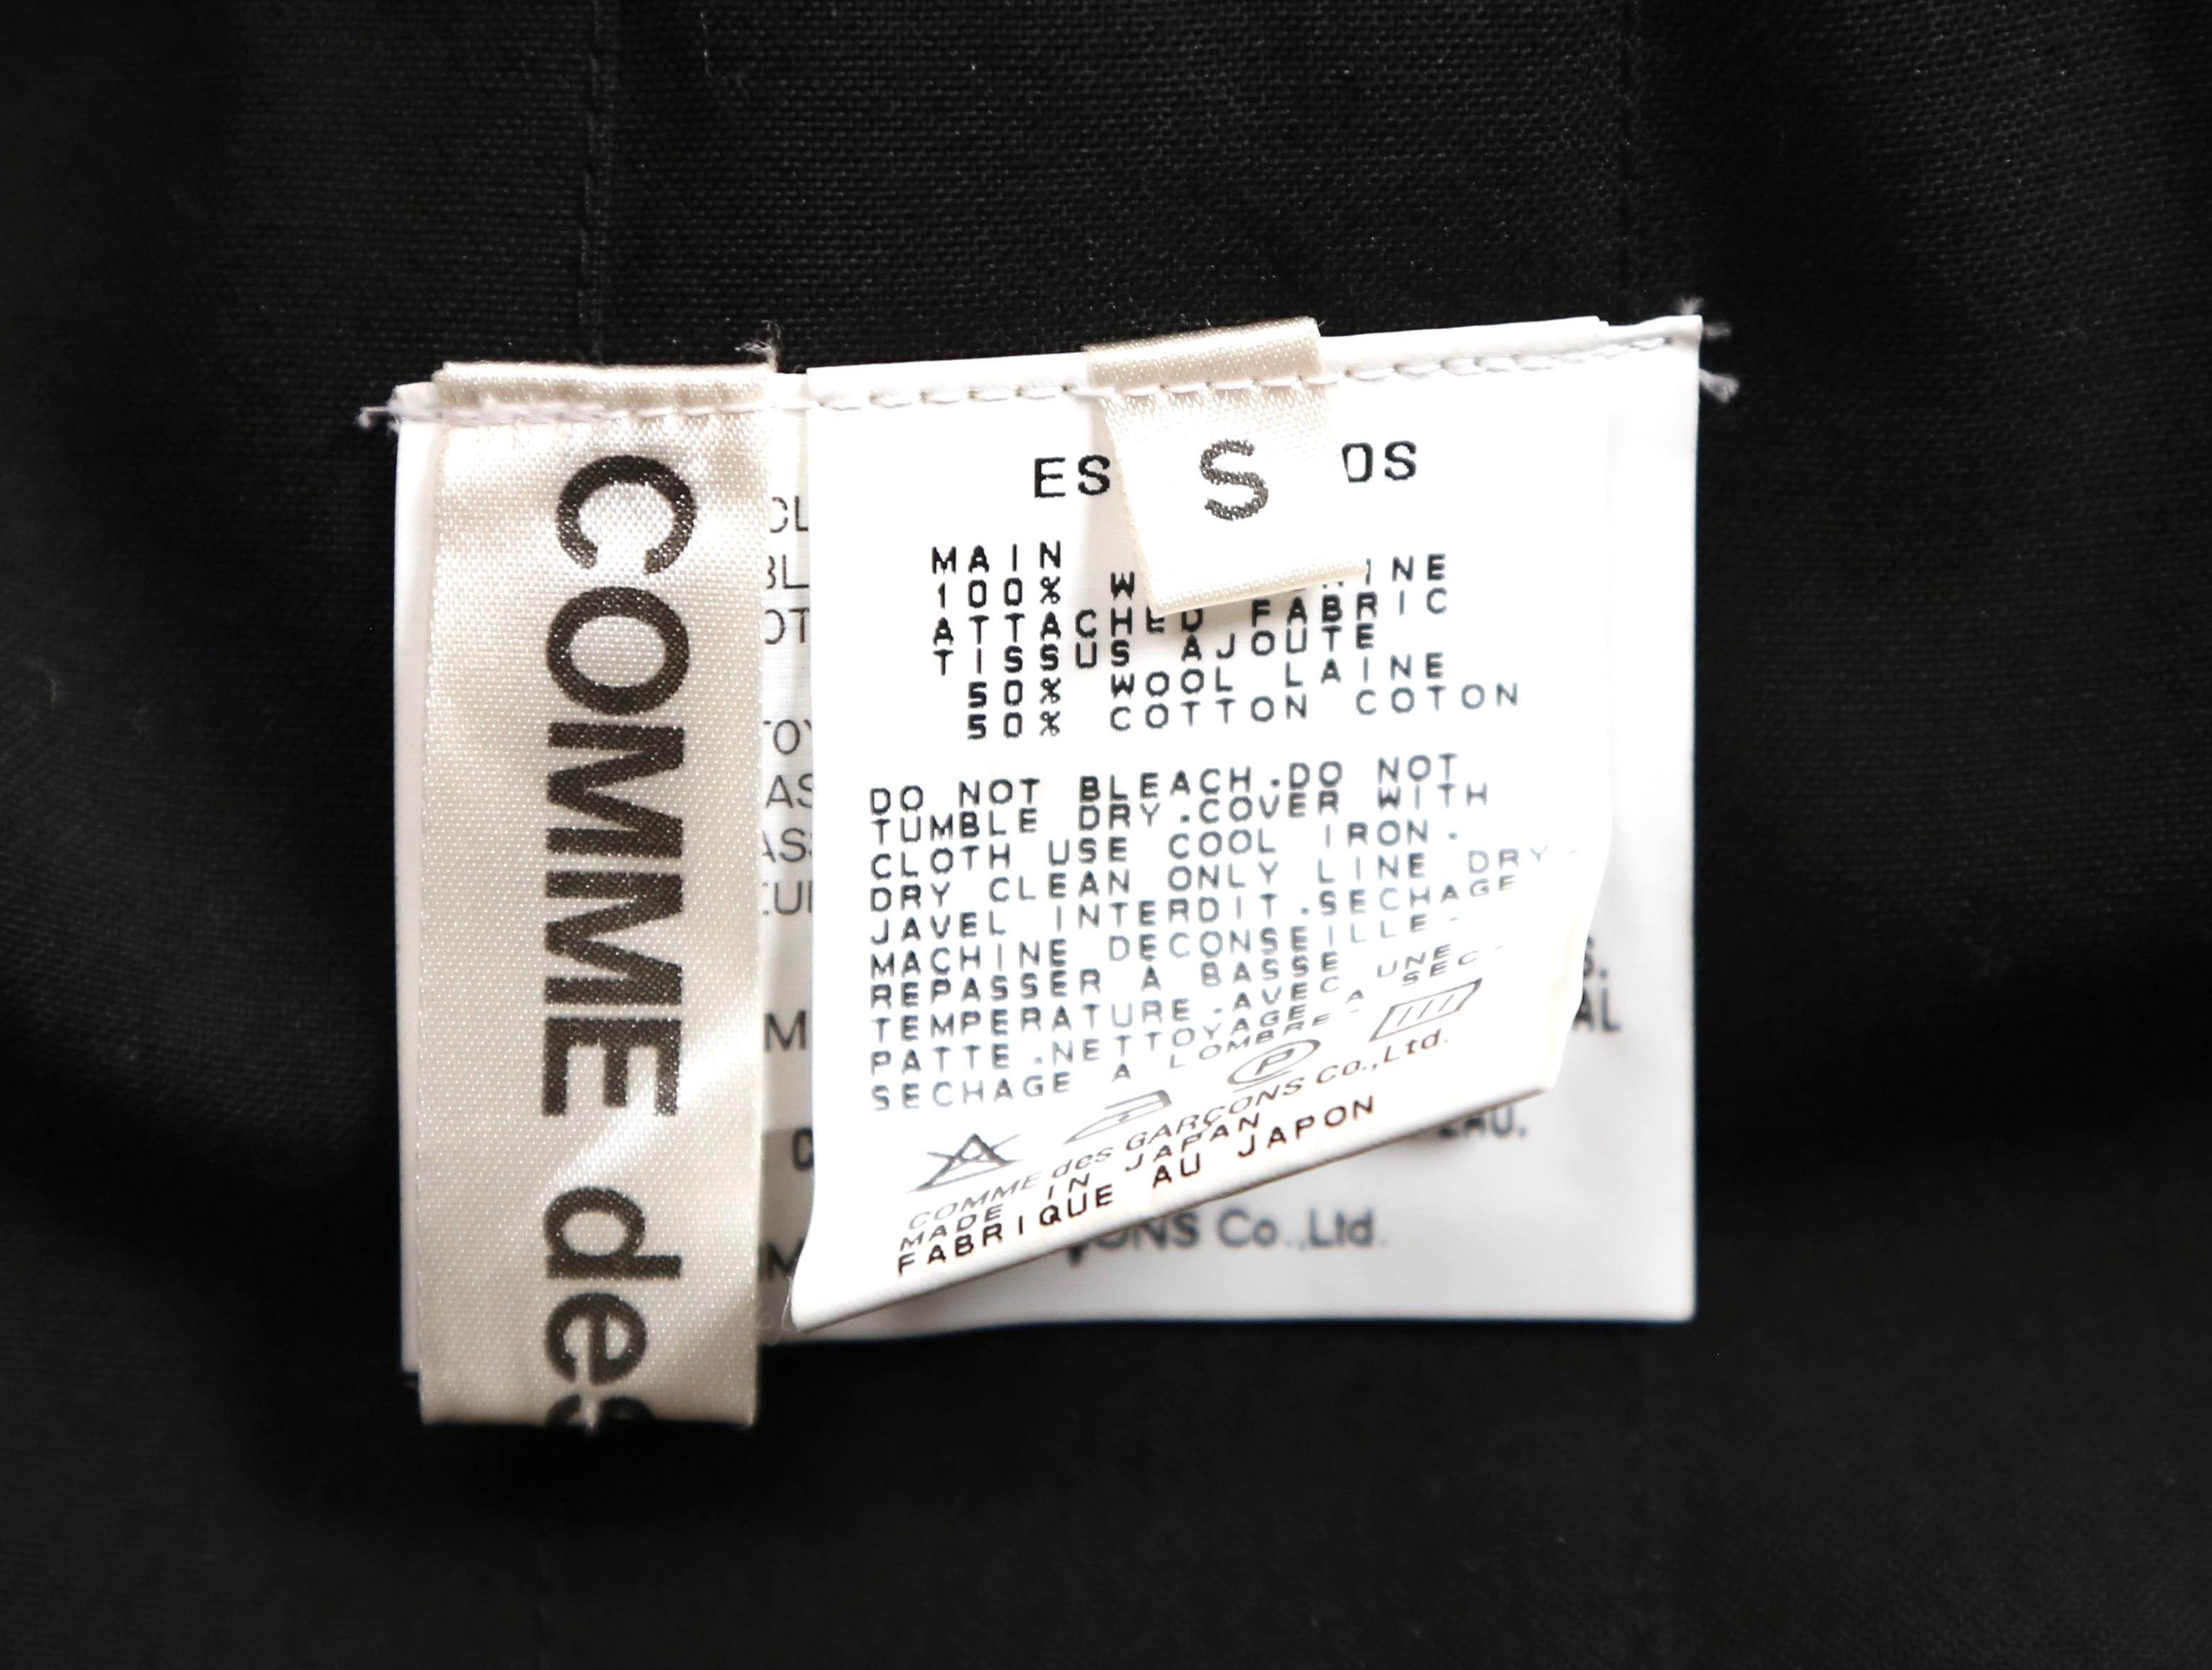 1998 COMME DES GARCONS 'FUSION' layered jacket and runway skirt 3